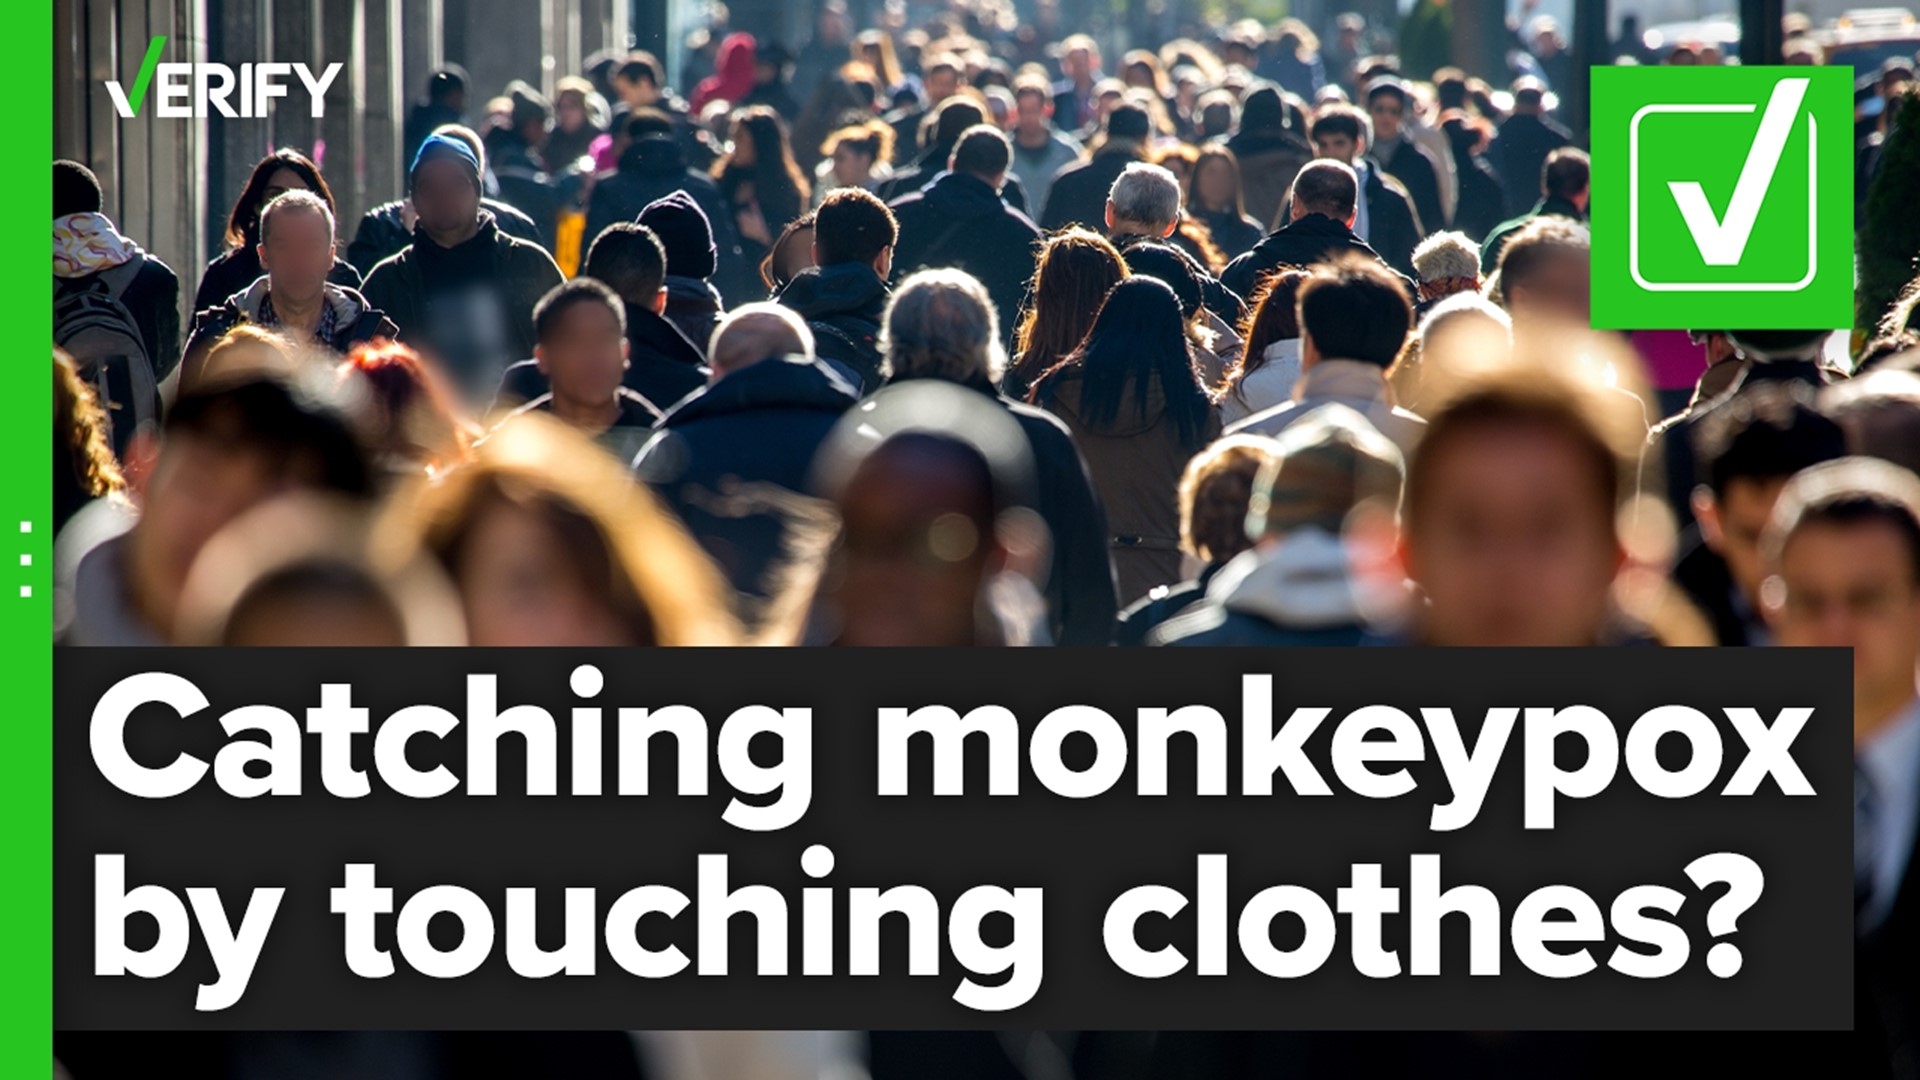 Can monkeypox spread through touching contaminated clothing and linens? The VERIFY team confirms this is true.